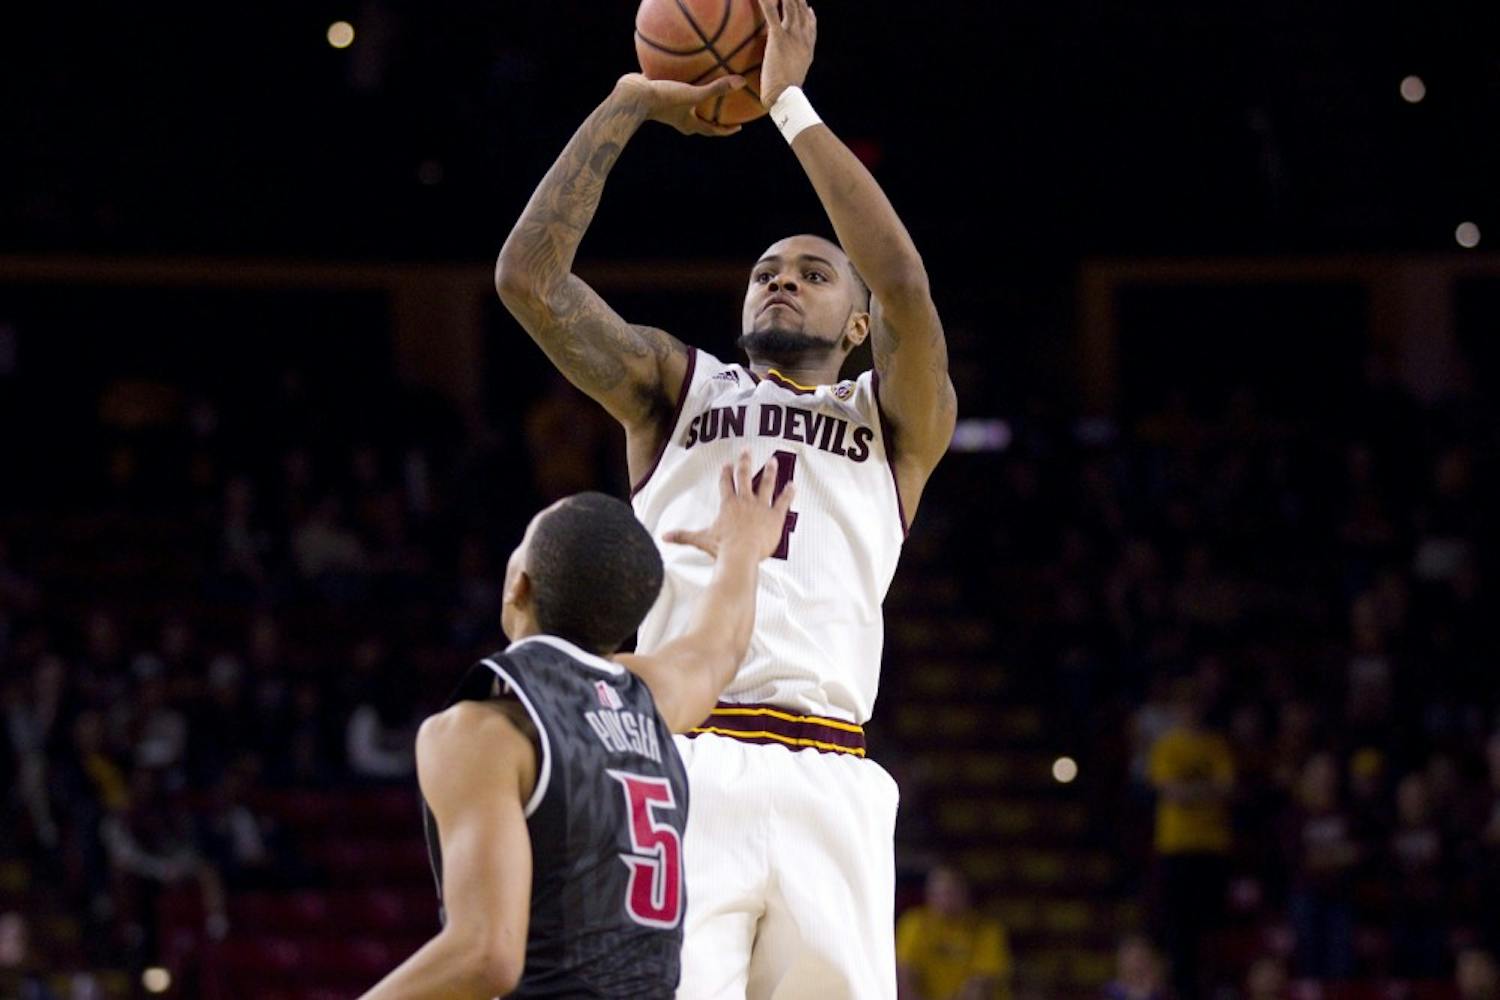 ASU senior guard Torian Graham (4) shoots a three-pointer in the second half of a men's basketball game against the UNLV Runnin' Rebels in Wells Fargo Arena in Tempe, Arizona on Saturday, Dec. 3, 2016. ASU won 97-73, putting them at 5-3 on the season.